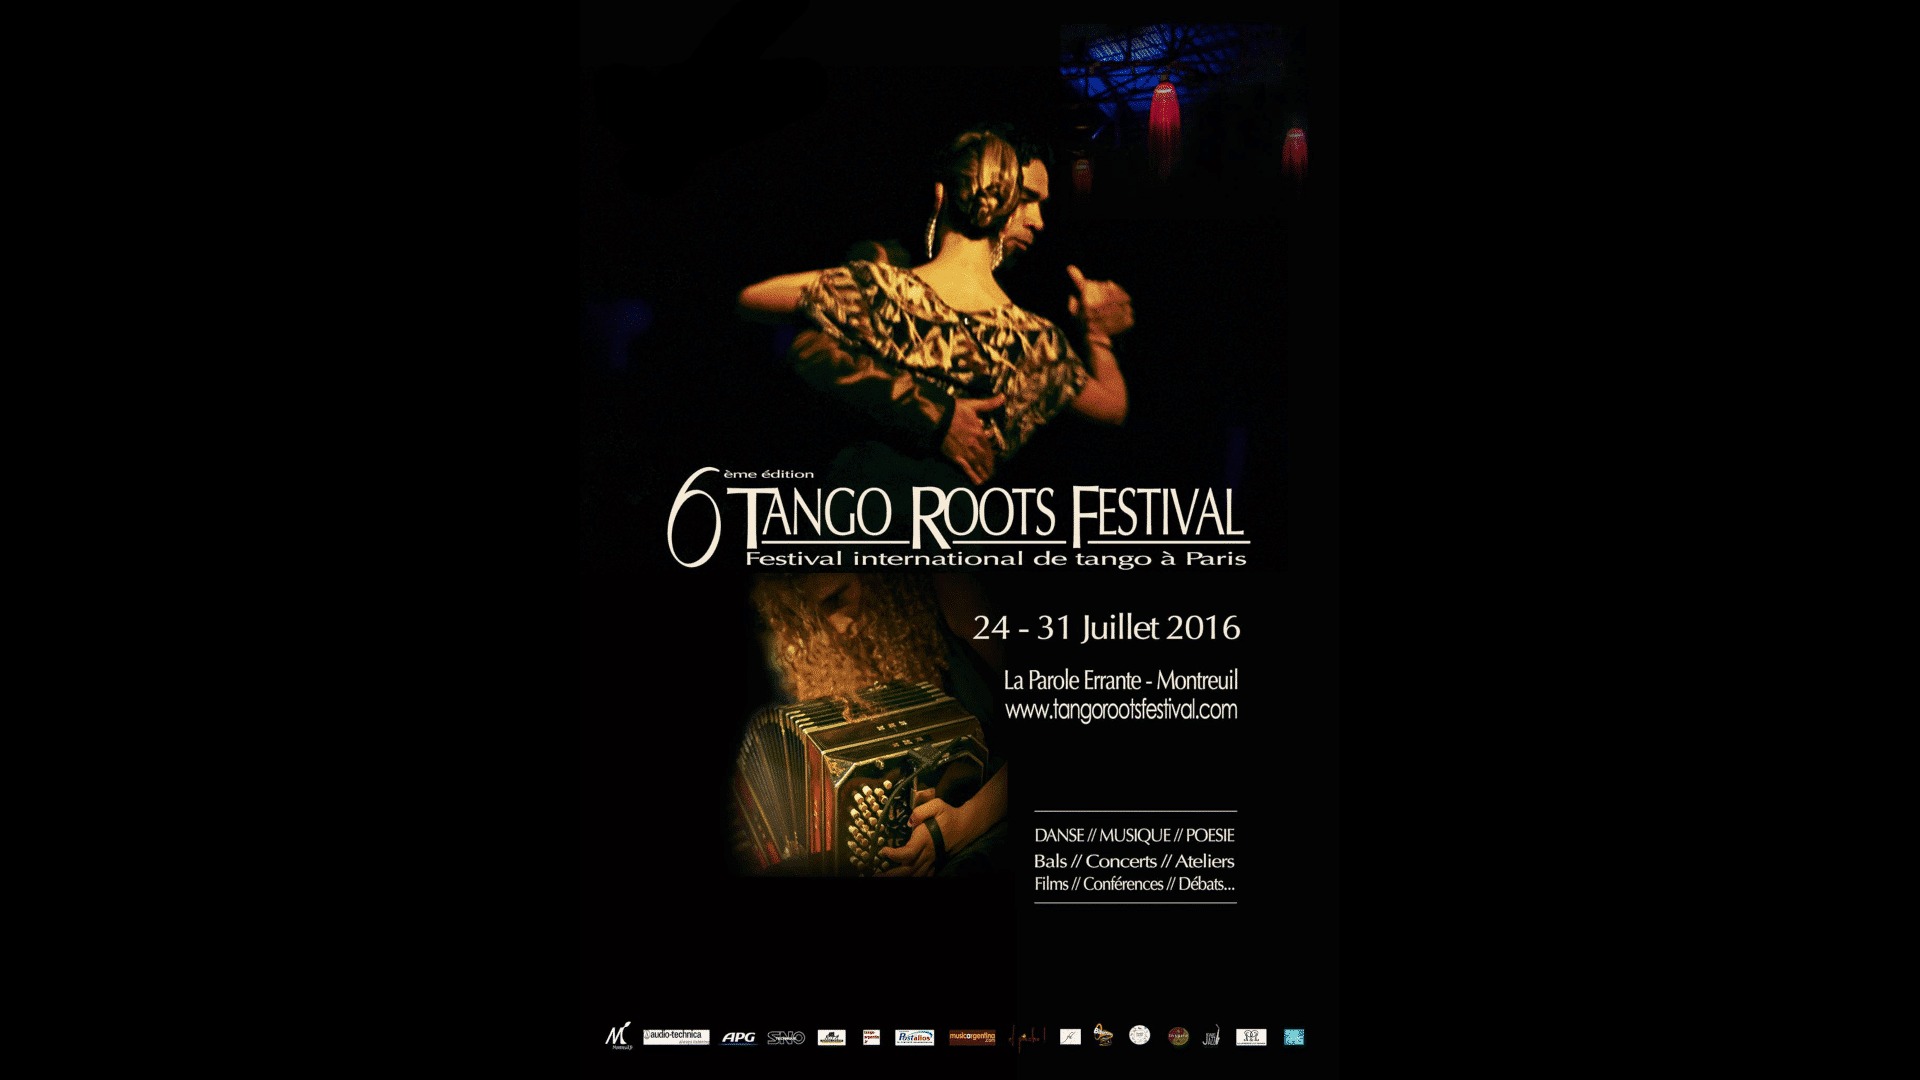 Tango Roots Festival 2016 event picture